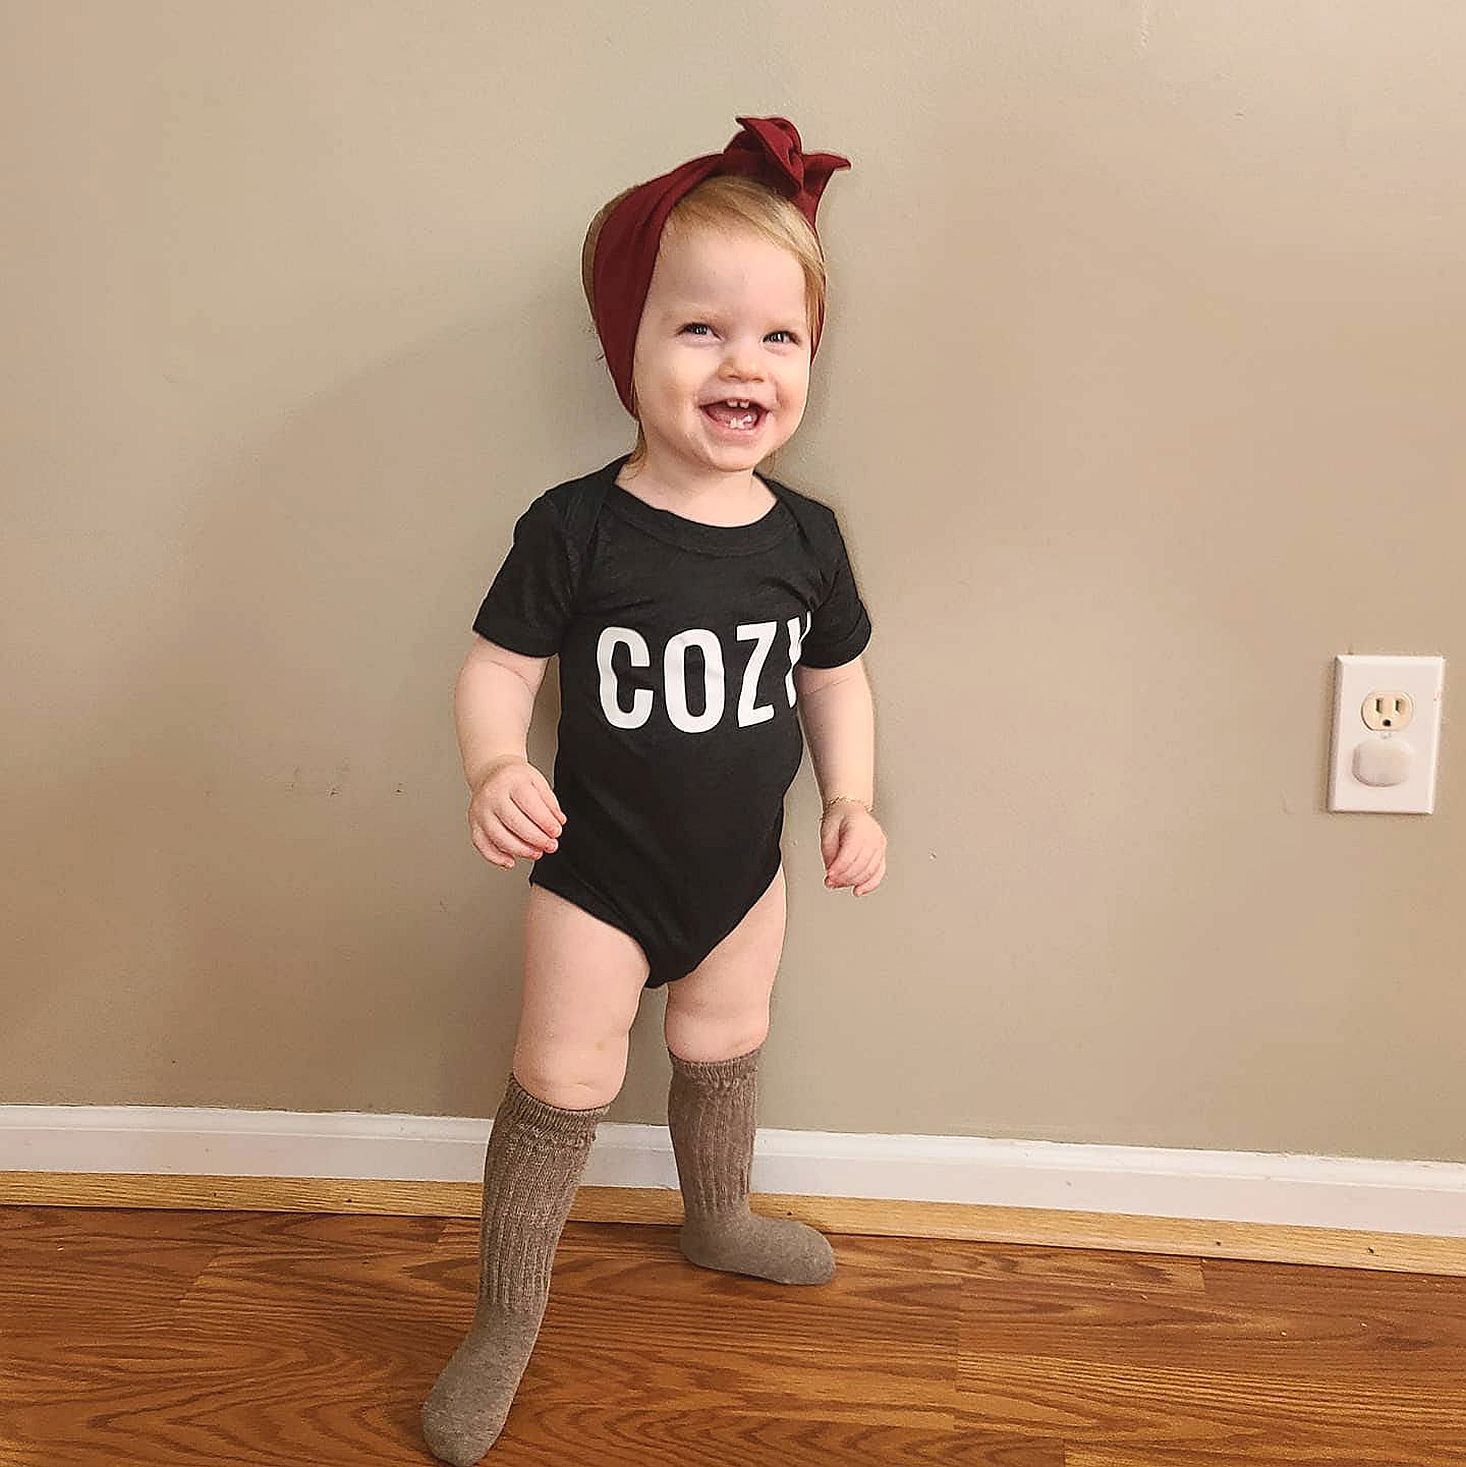 Small Shop Baby Box Winter 2020 clothing modeled